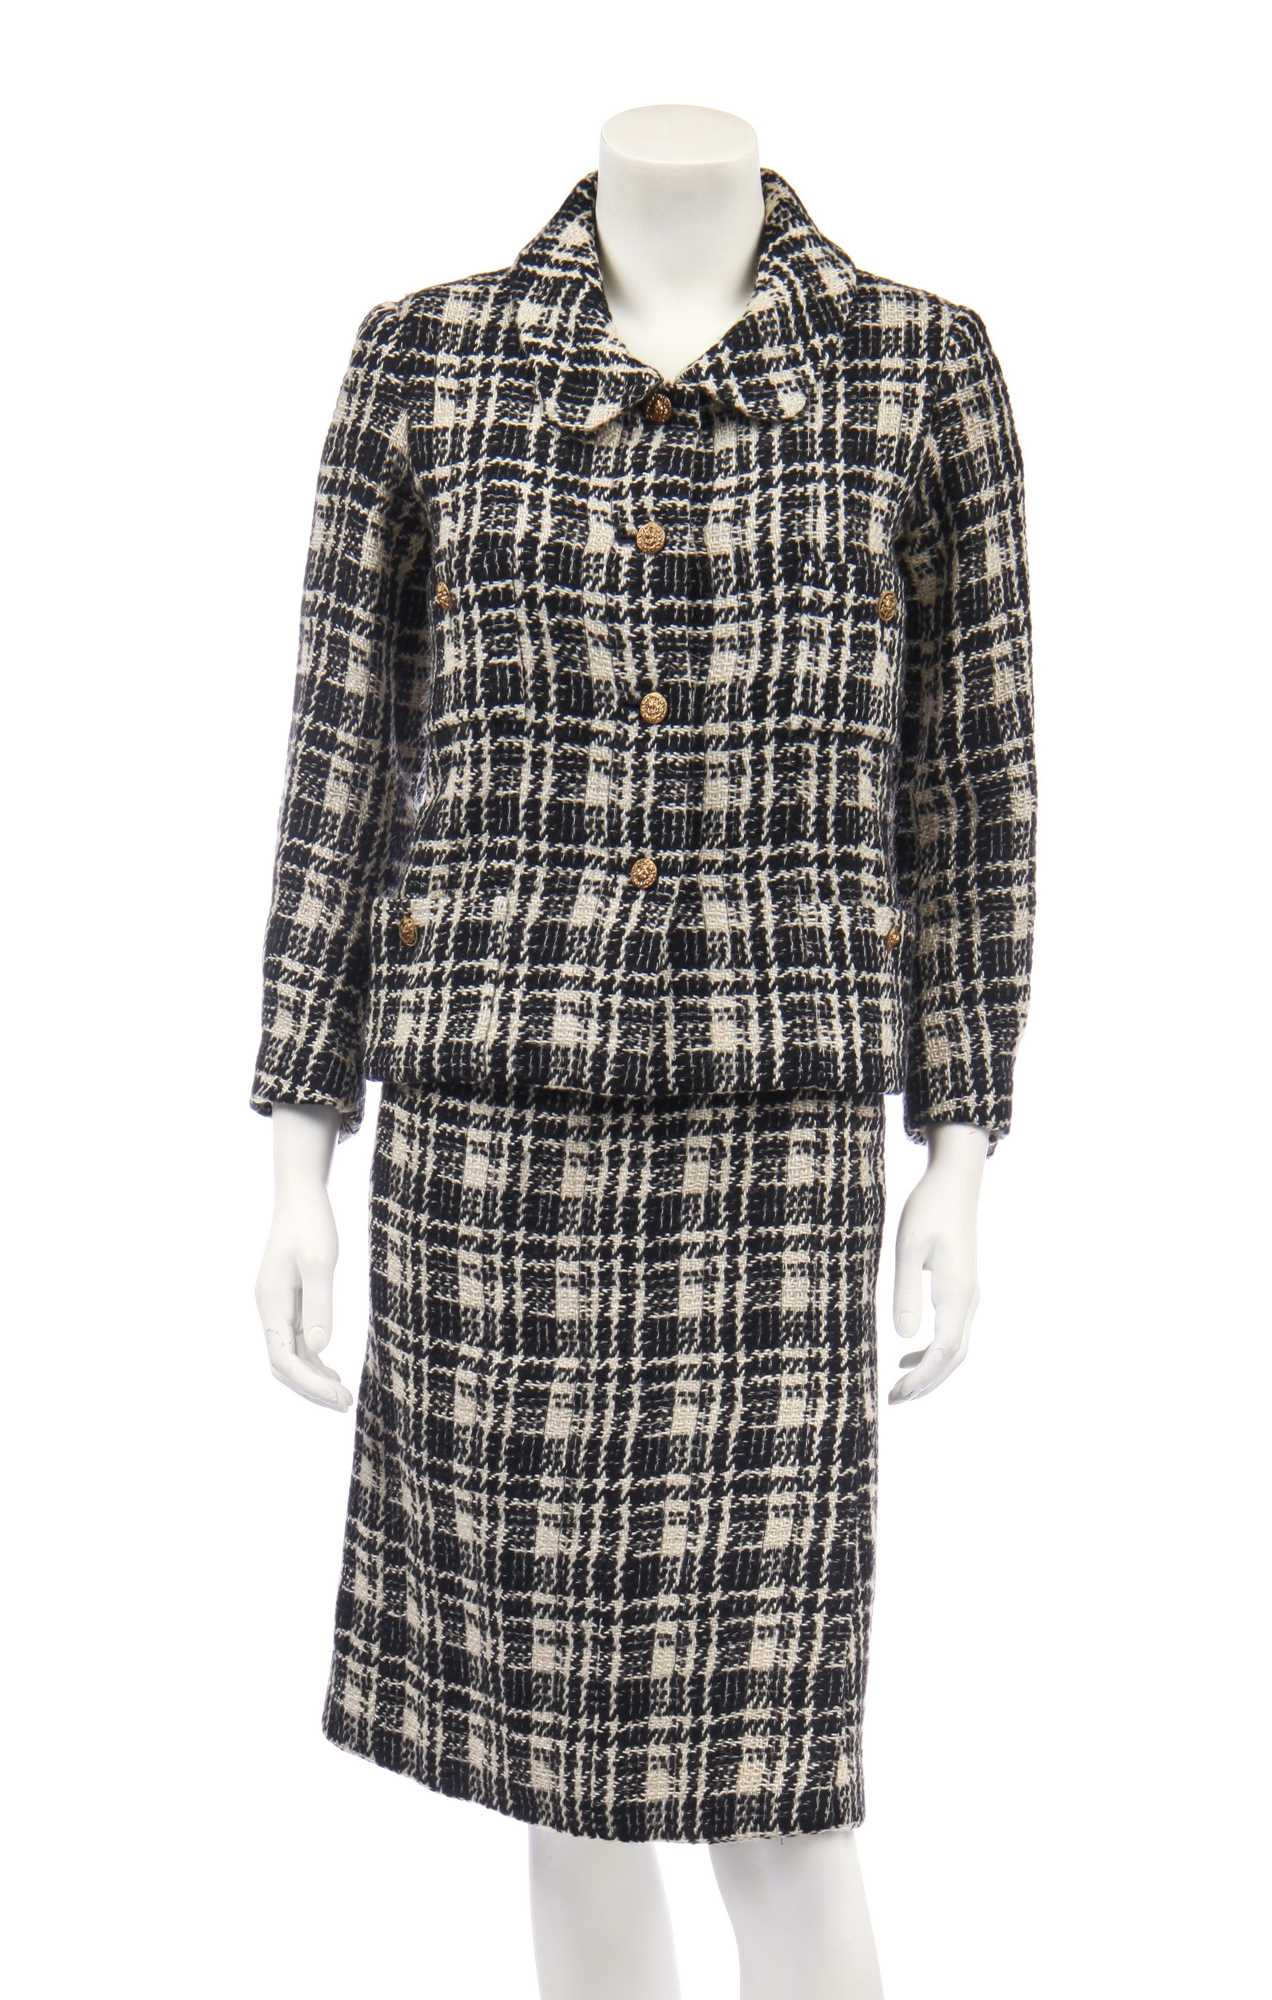 Lot 14 - A Chanel couture black and white tartan wool suit, mid 1960s